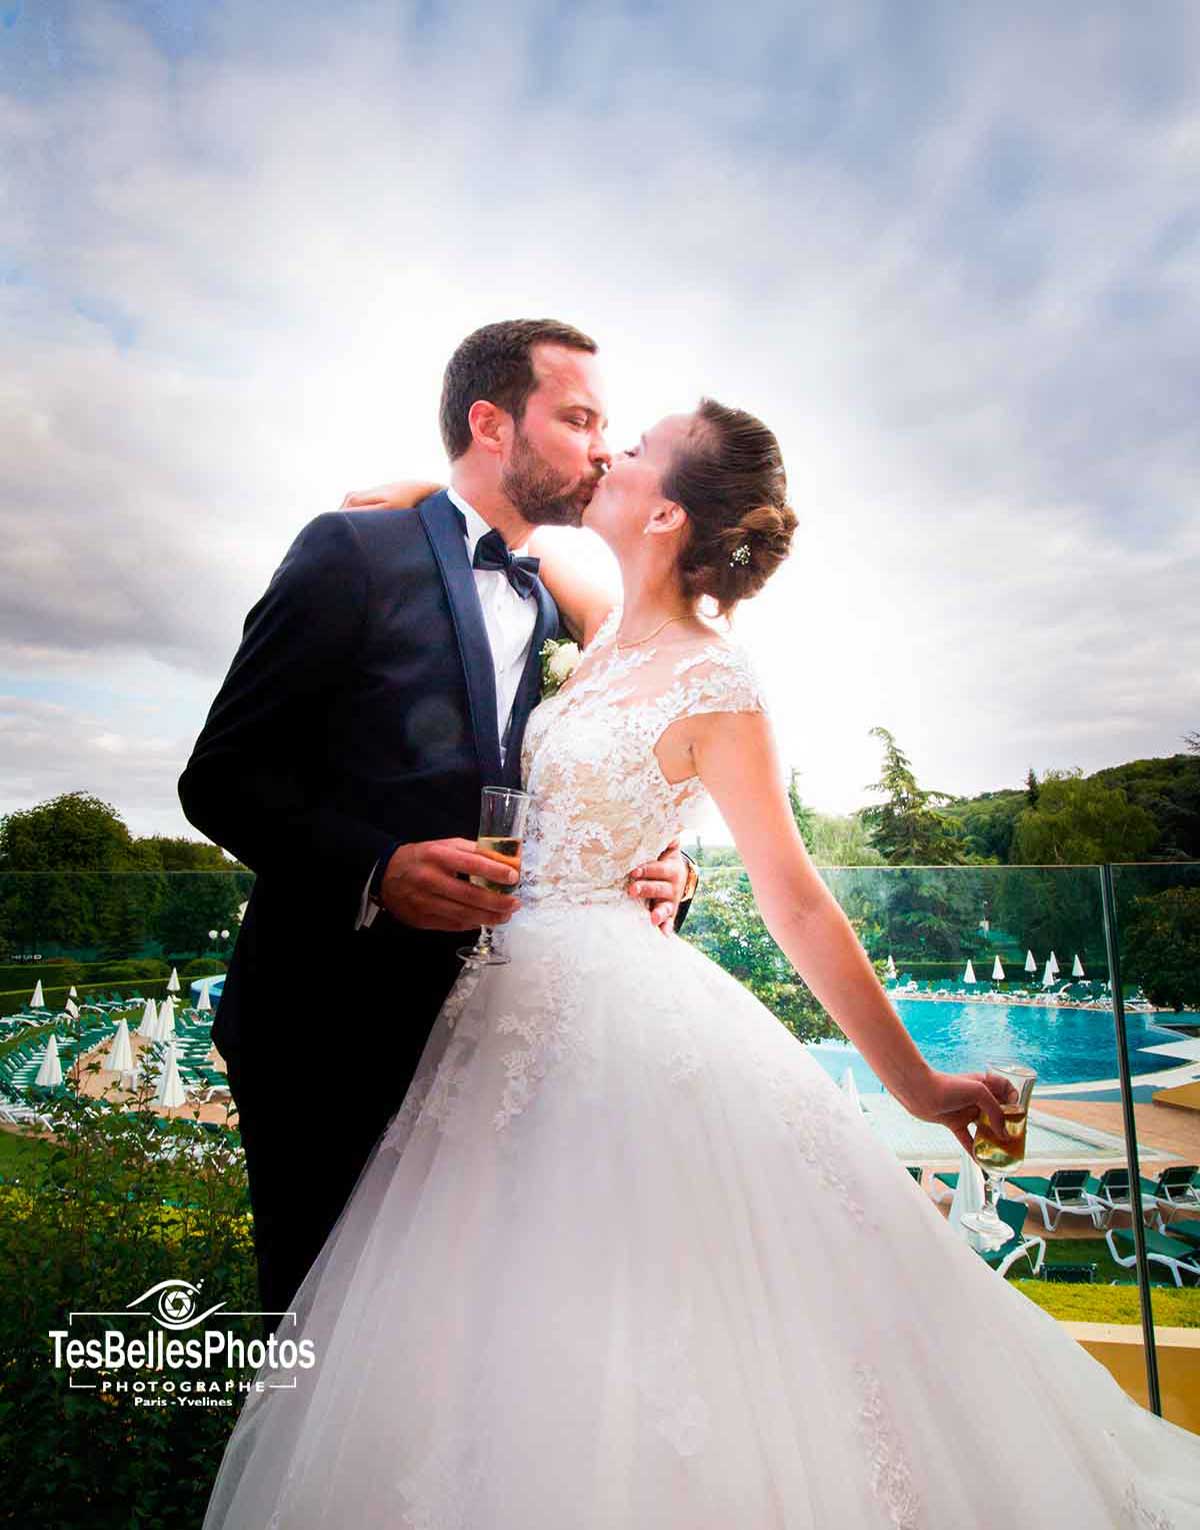 Photo mariage aux Pyramides Le Port-Marly, photos reportage mariage Le Port-Marly en Yvelines